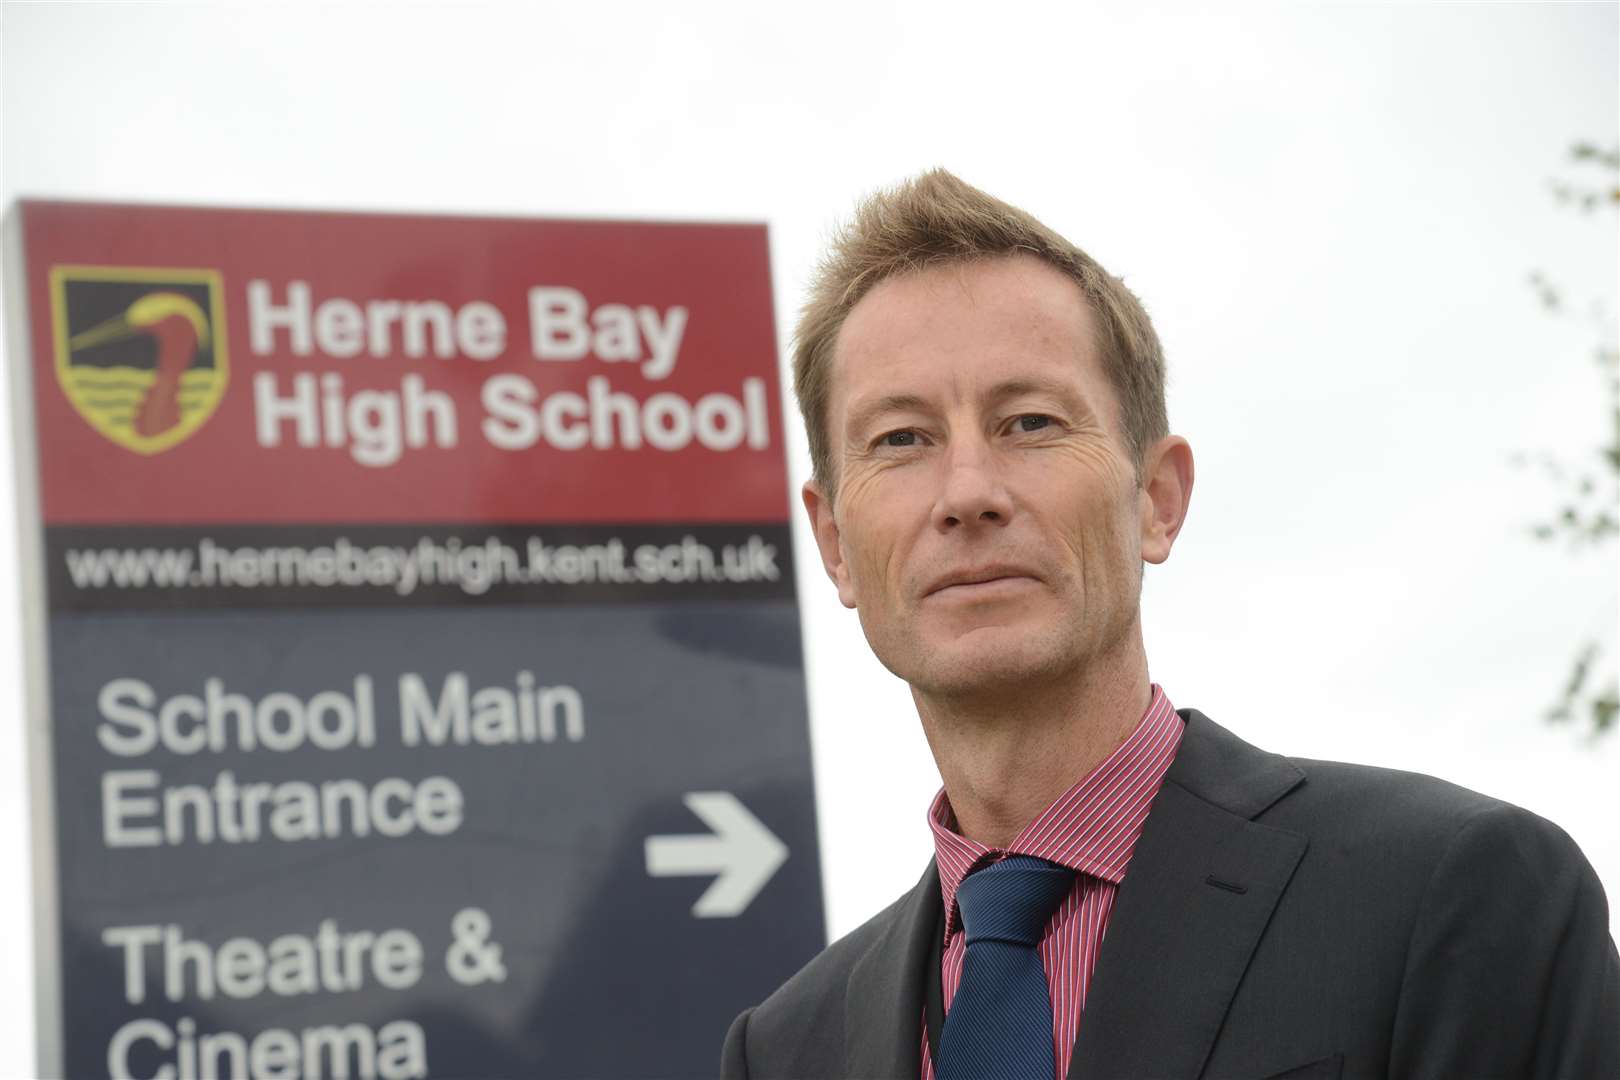 Jon Boyes says Herne Bay High could be forced to accept as many as 290 pupils at the start of the next academic year